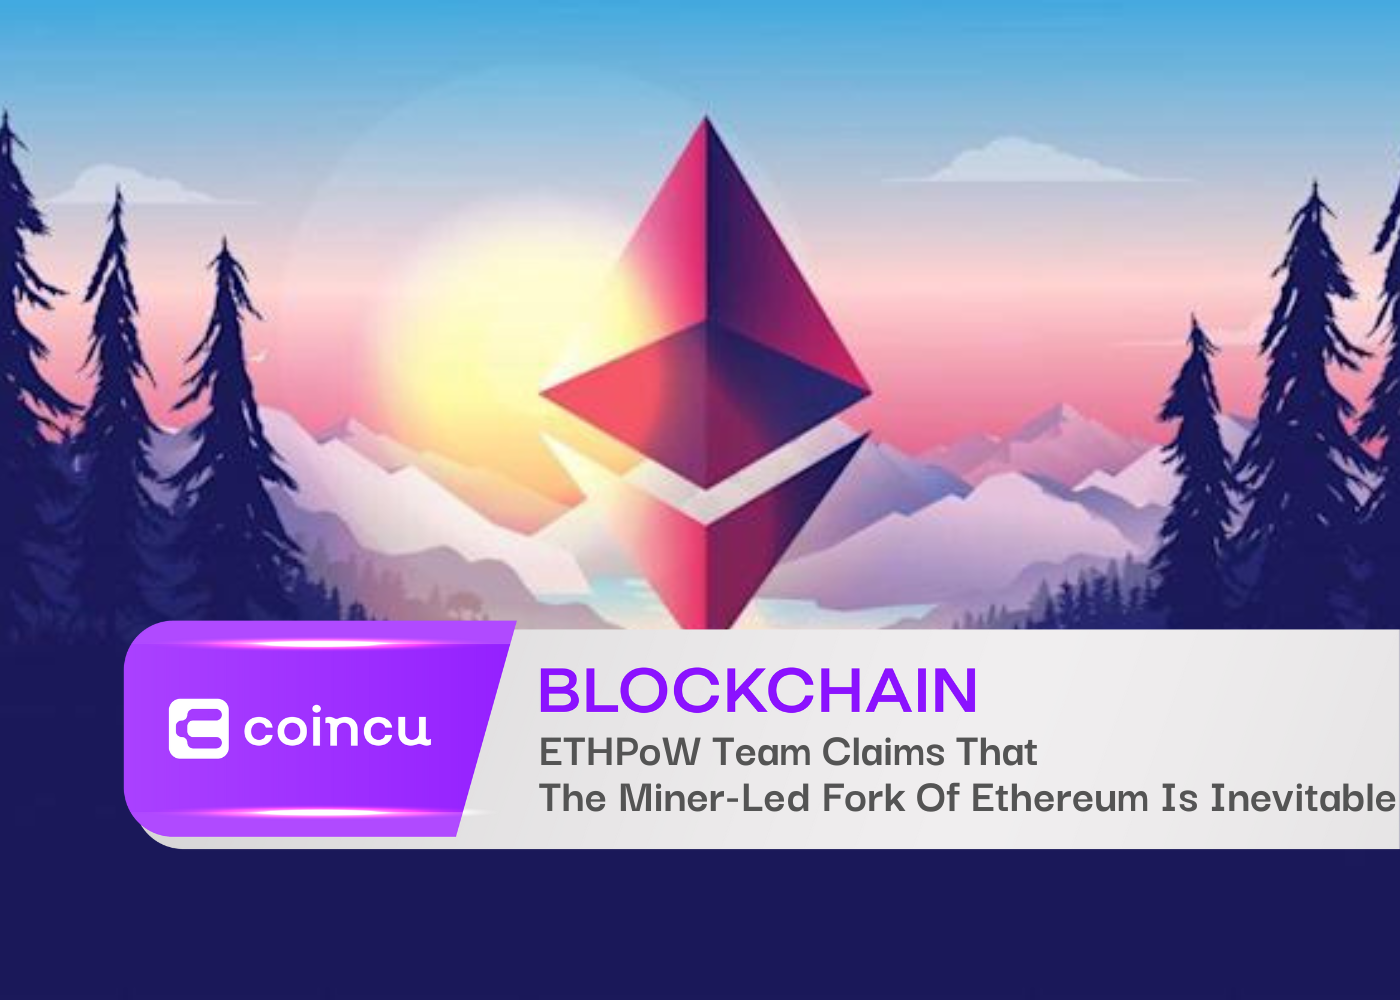 ETHPoW Team Claims That